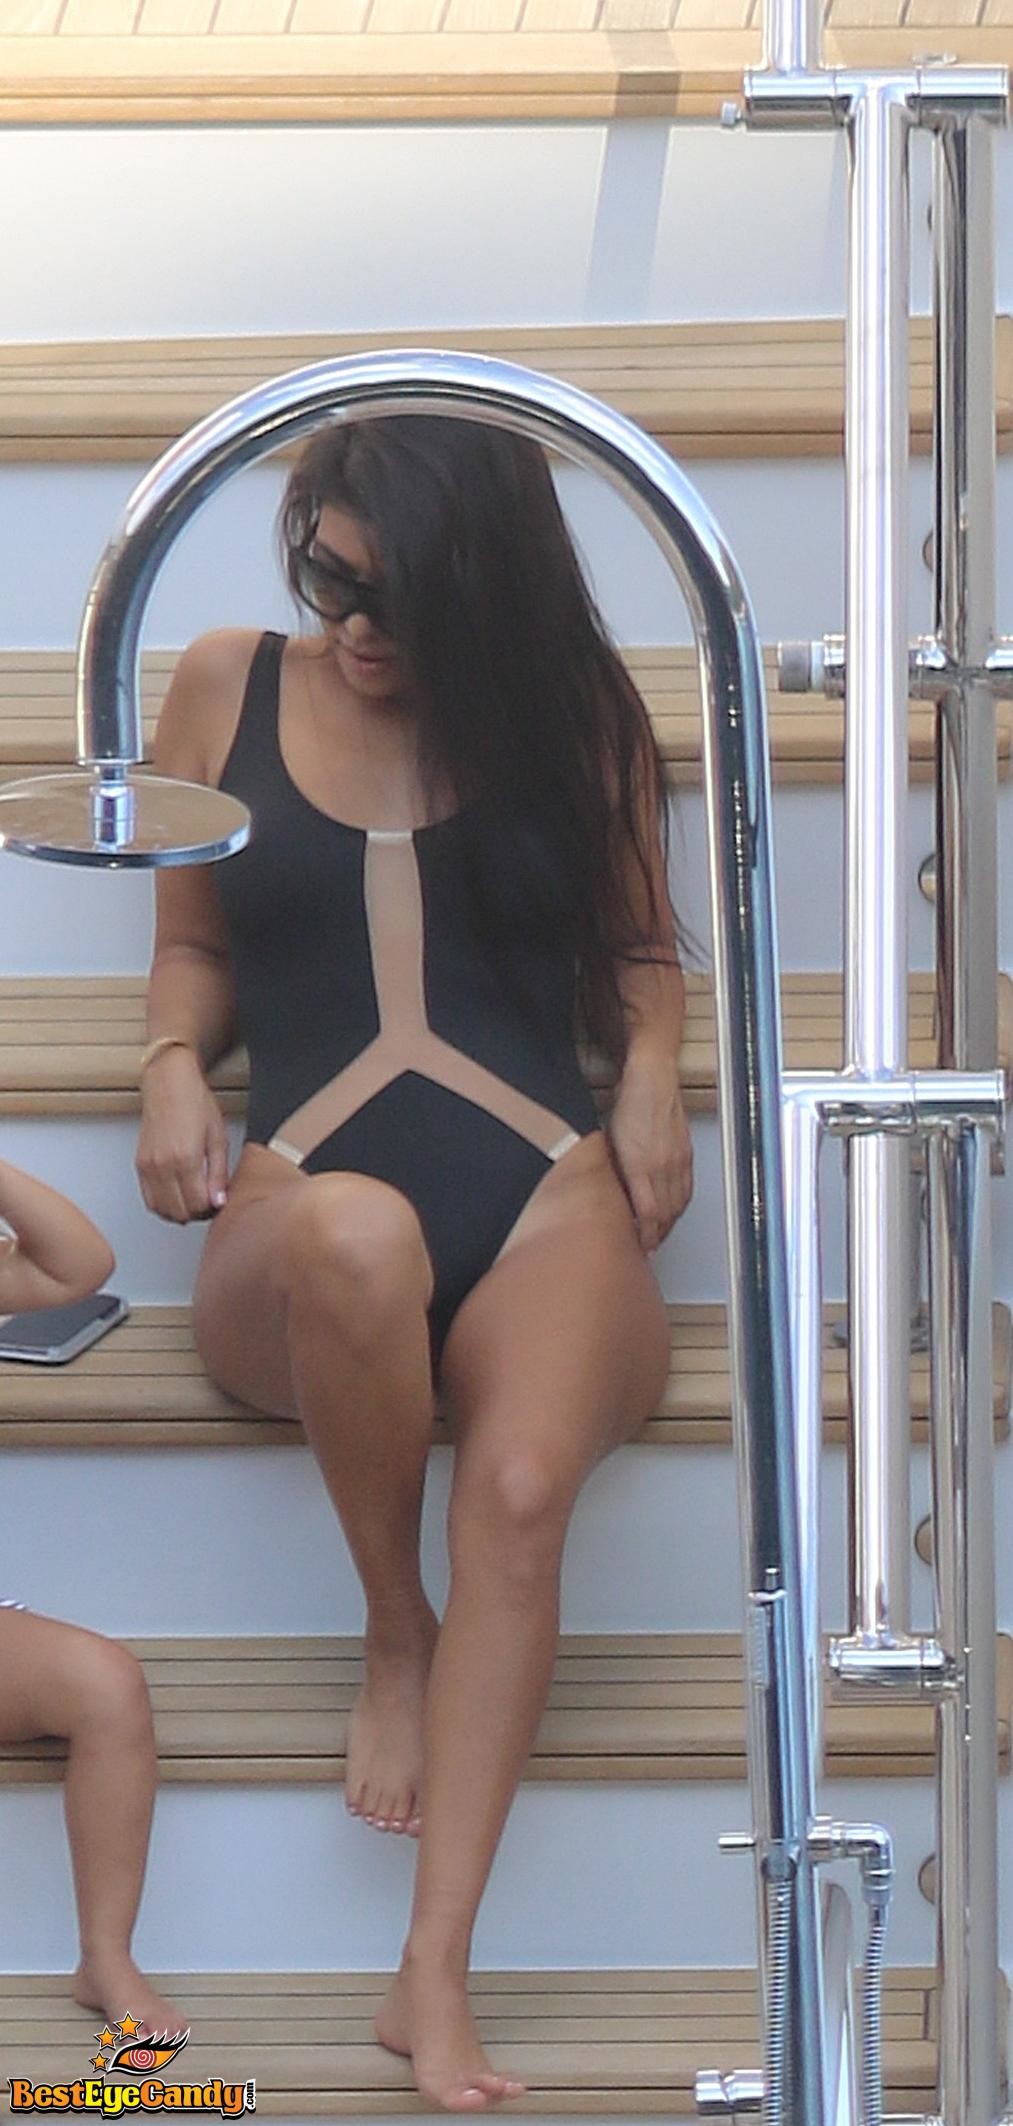 Free porn pics of Kourtney Kardashian - Another Expensive Swimsuit 7 of 13 pics